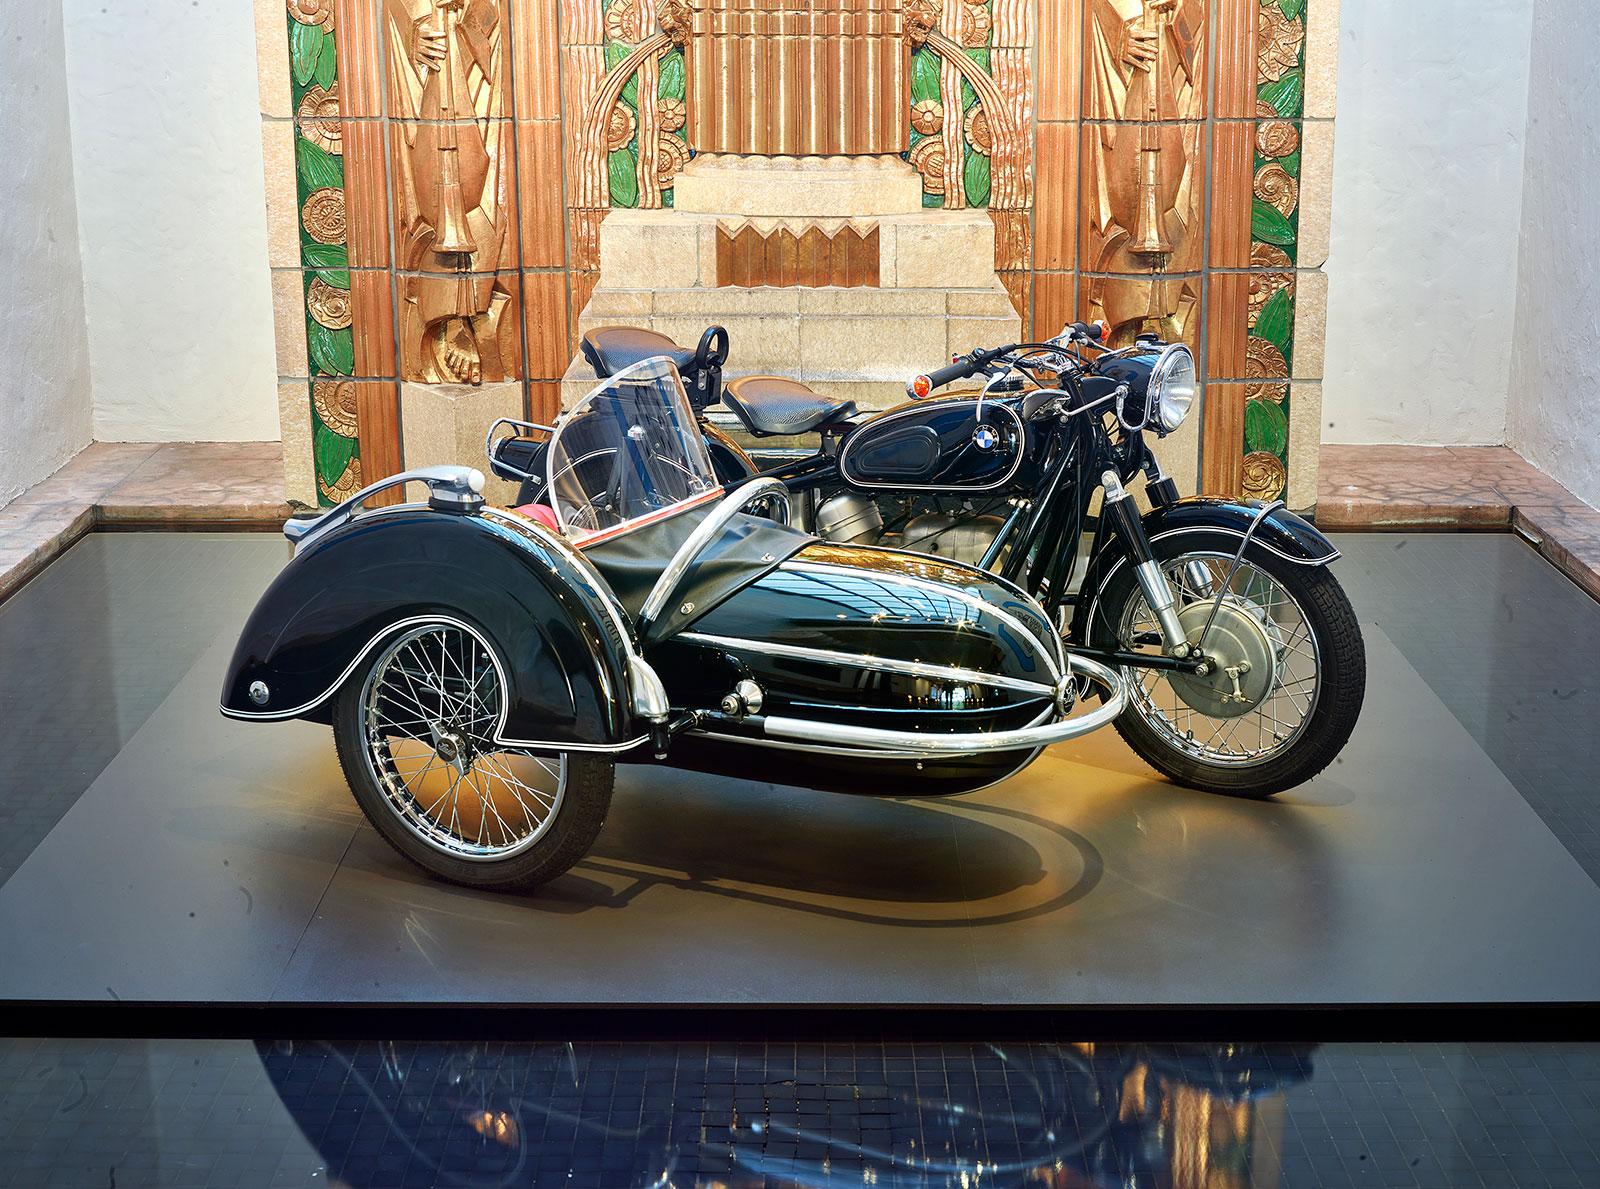 Motorcycle and sidecar